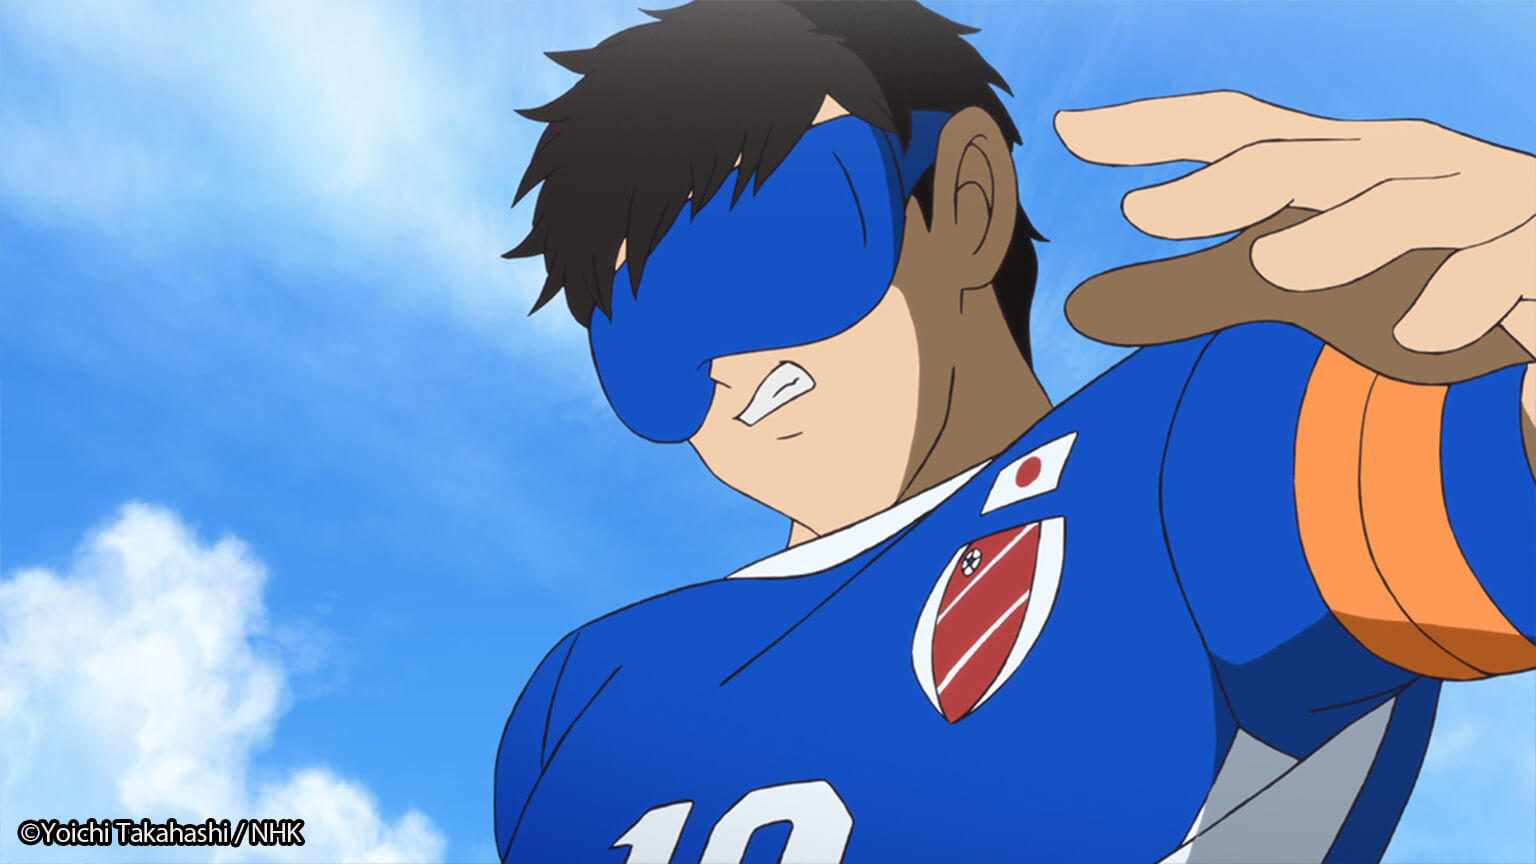 Episode 1: Football 5-a-side - Animation x Paralympic: Who Is Your Hero? |  NHK WORLD-JAPAN On Demand